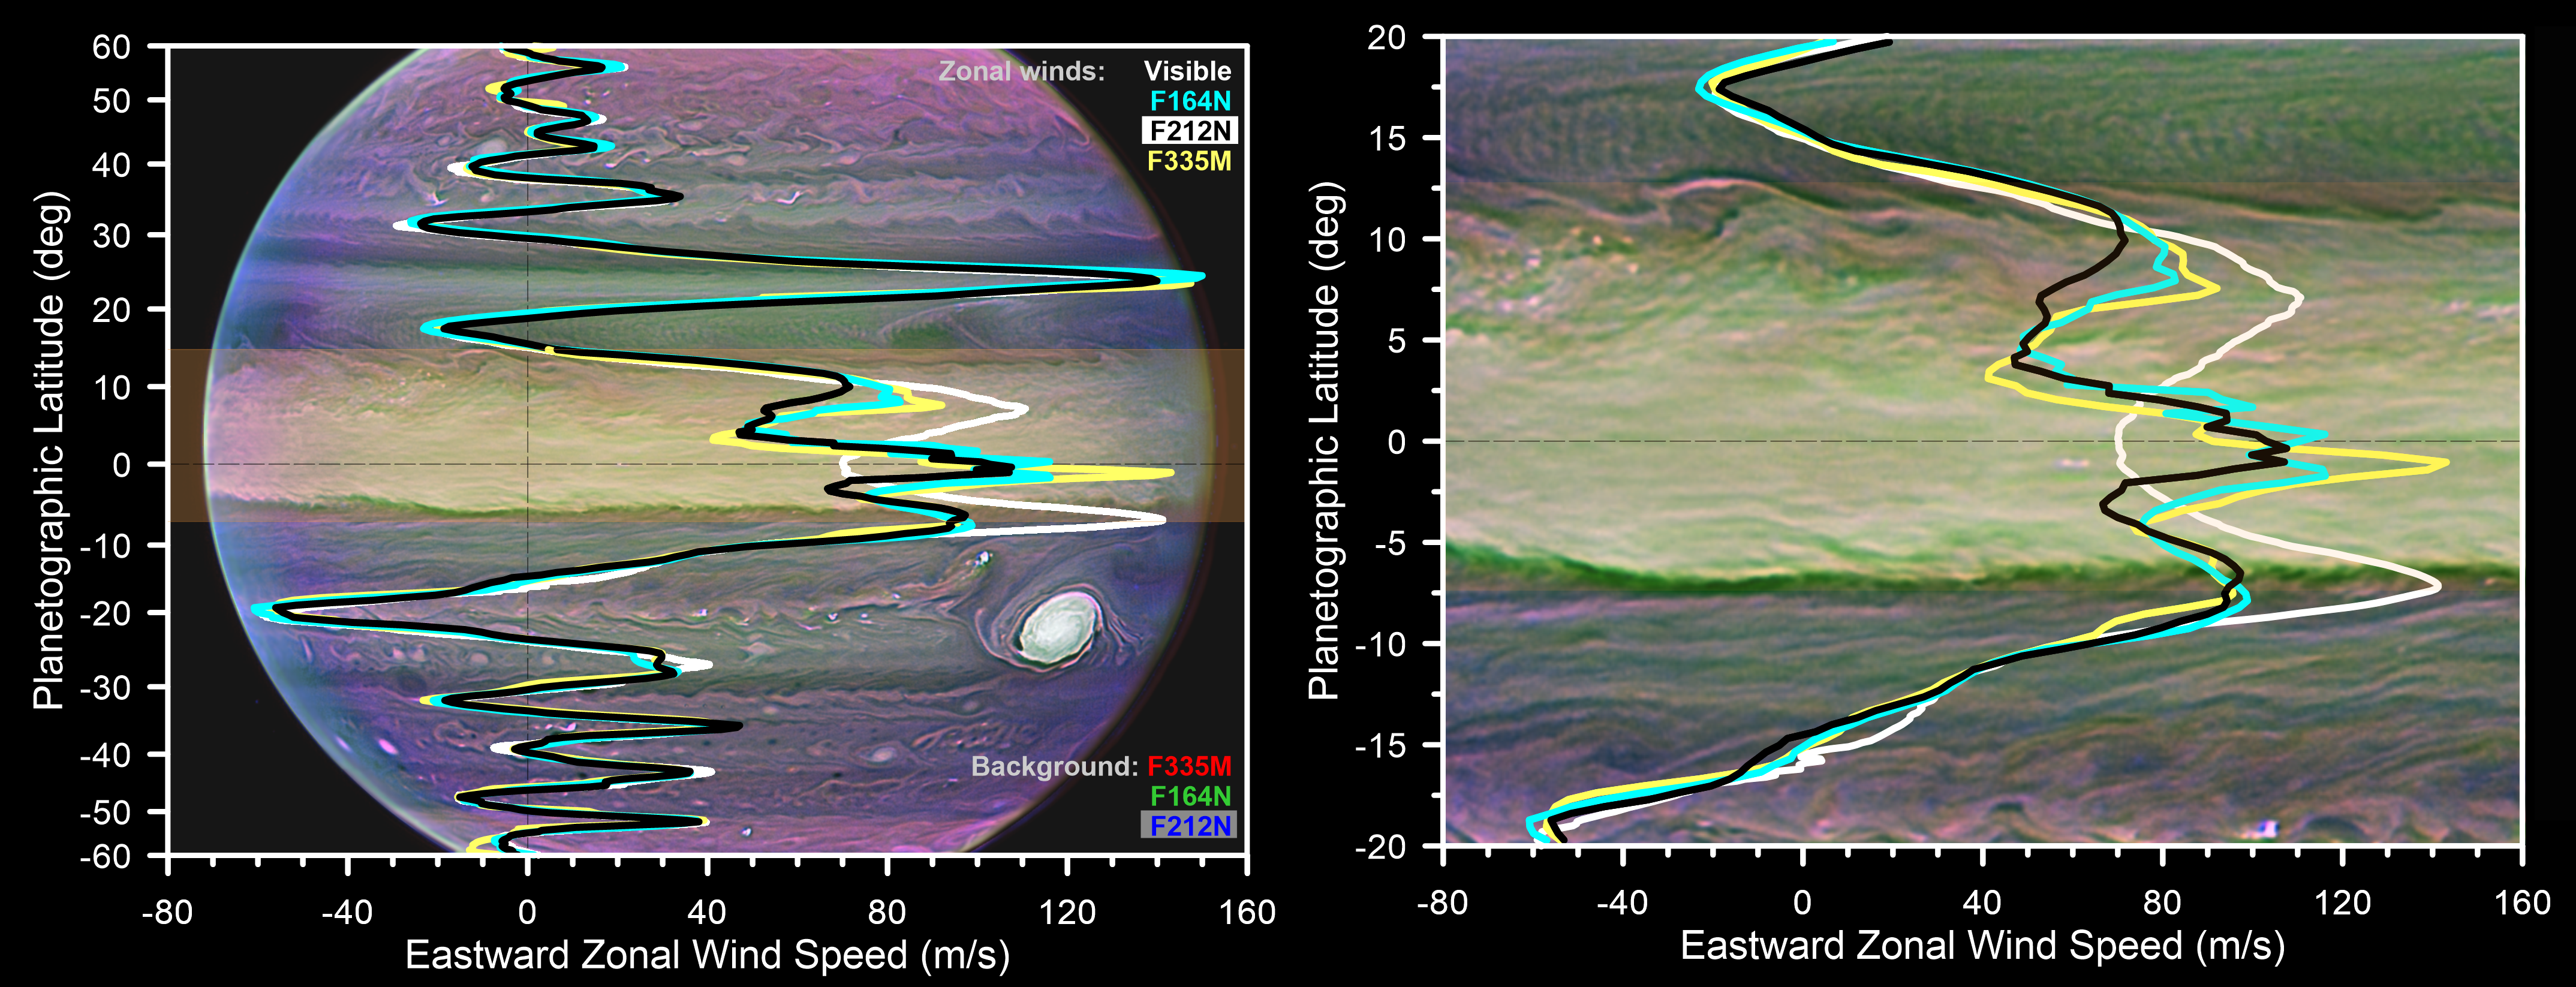 colorful image of Jupiter with wind direction indicated at various latitudes